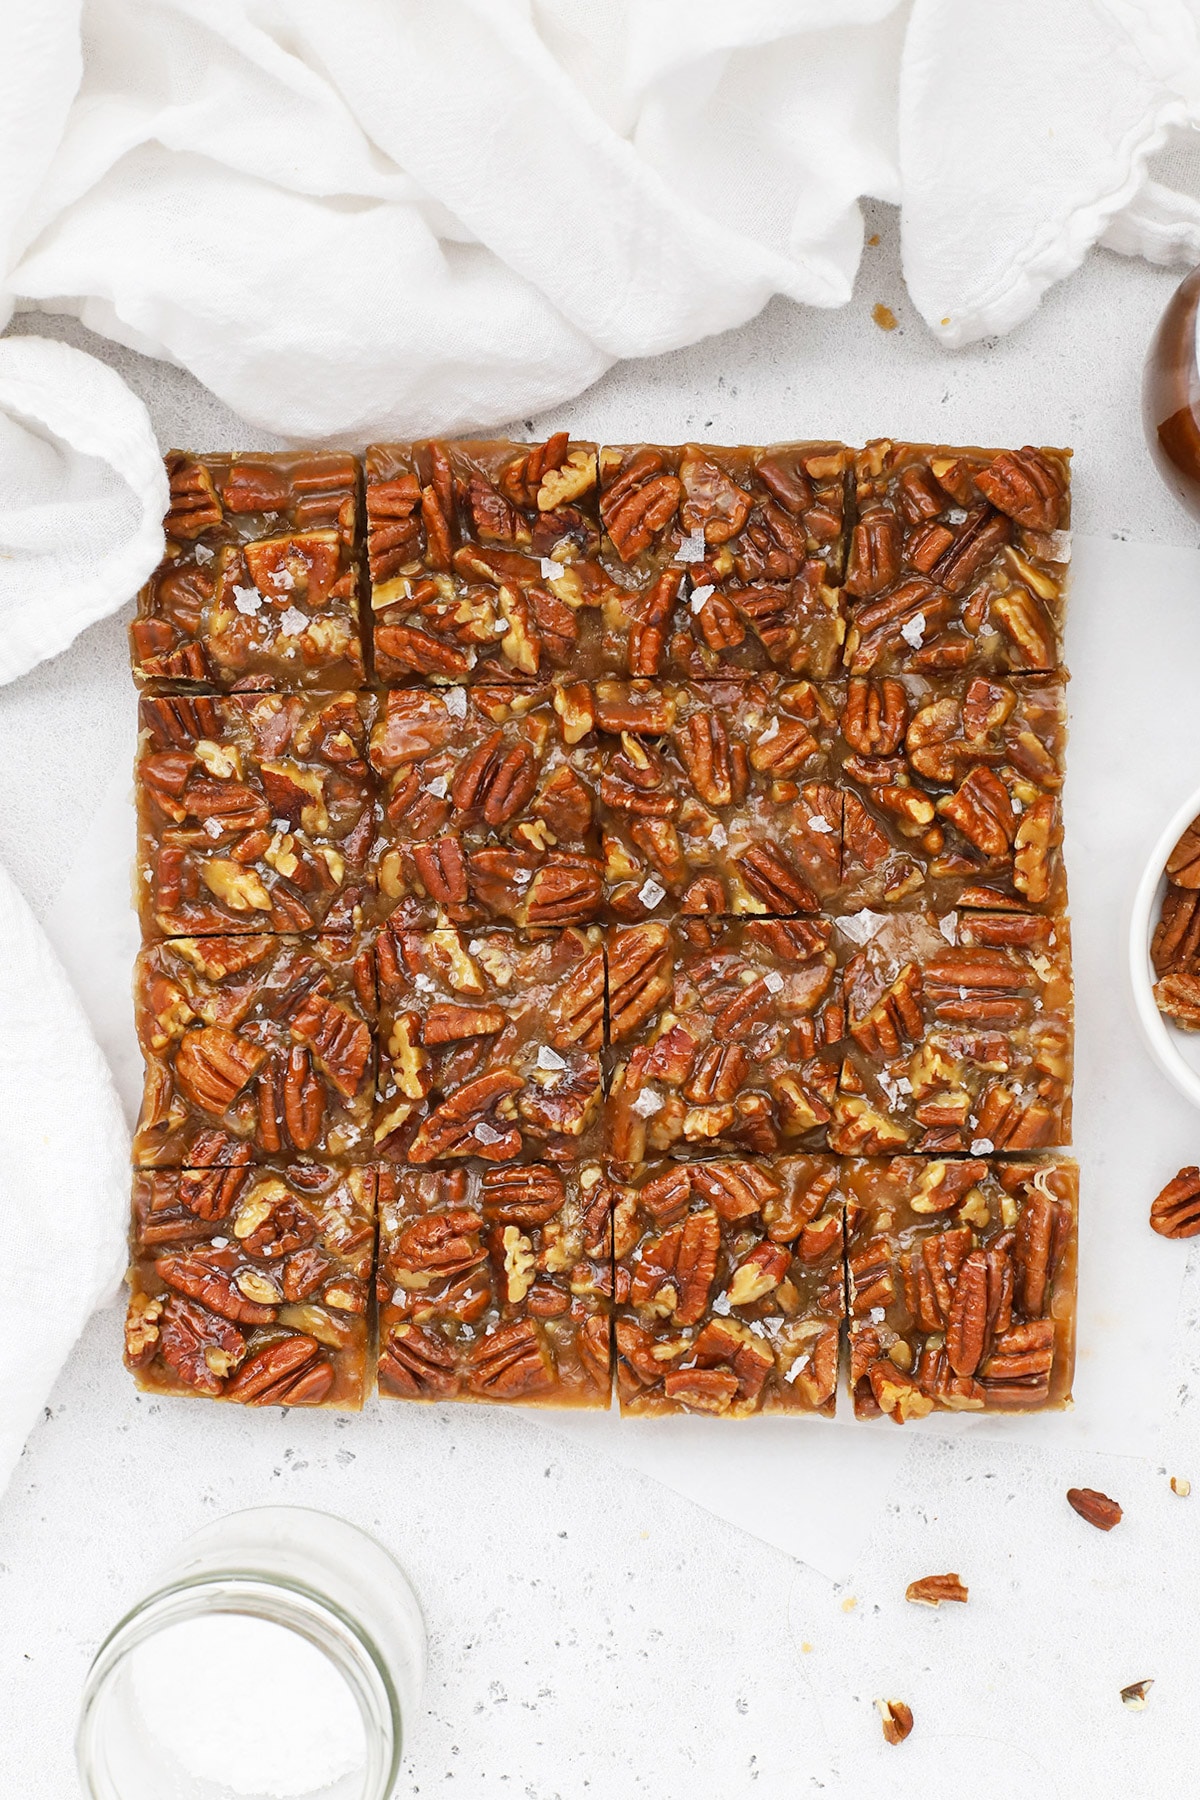 Overhead view of gluten-free salted caramel pecan bars cut into squares